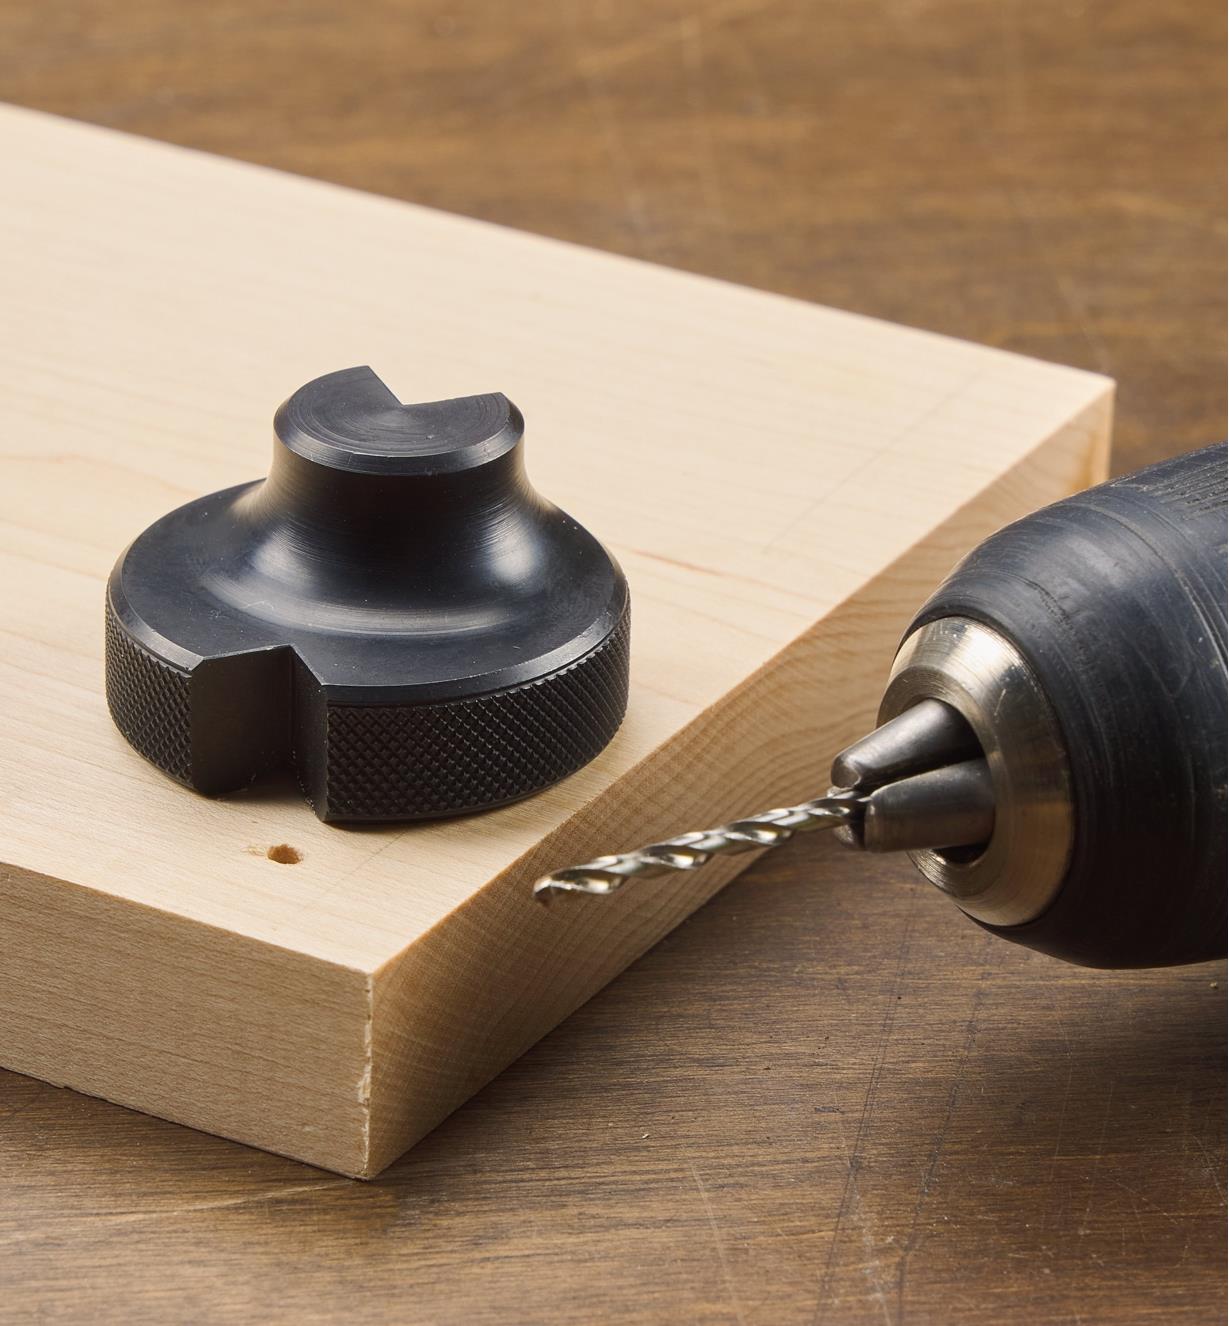 A board with a hole drilled in it, with a pocket drilling guide on top and a drill beside it